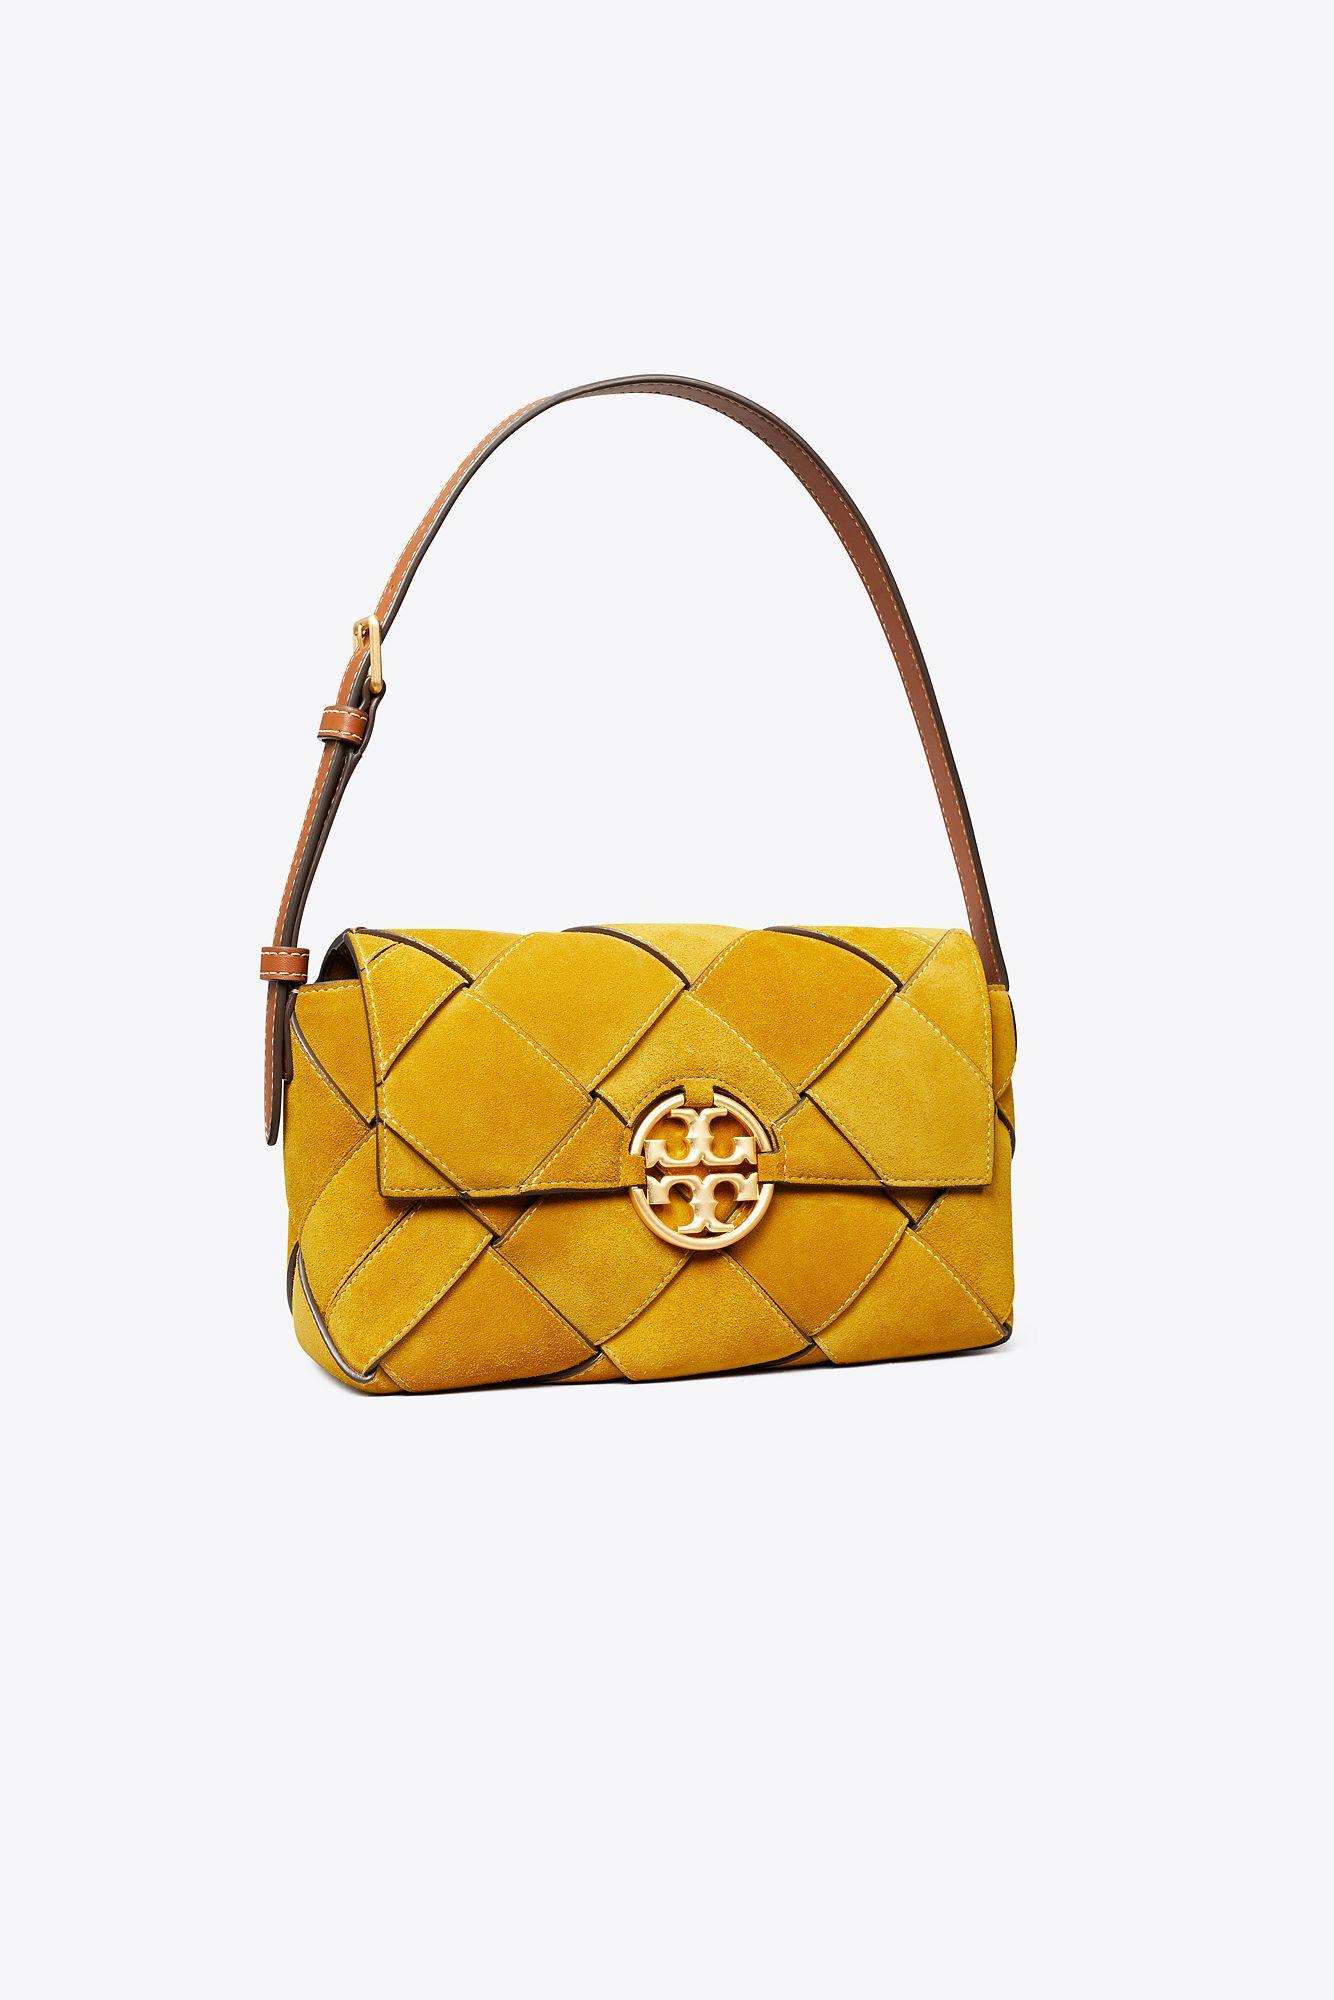 Tory Burch Oversized Miller Suede Woven Flap Shoulder Bag in Yellow | Lyst